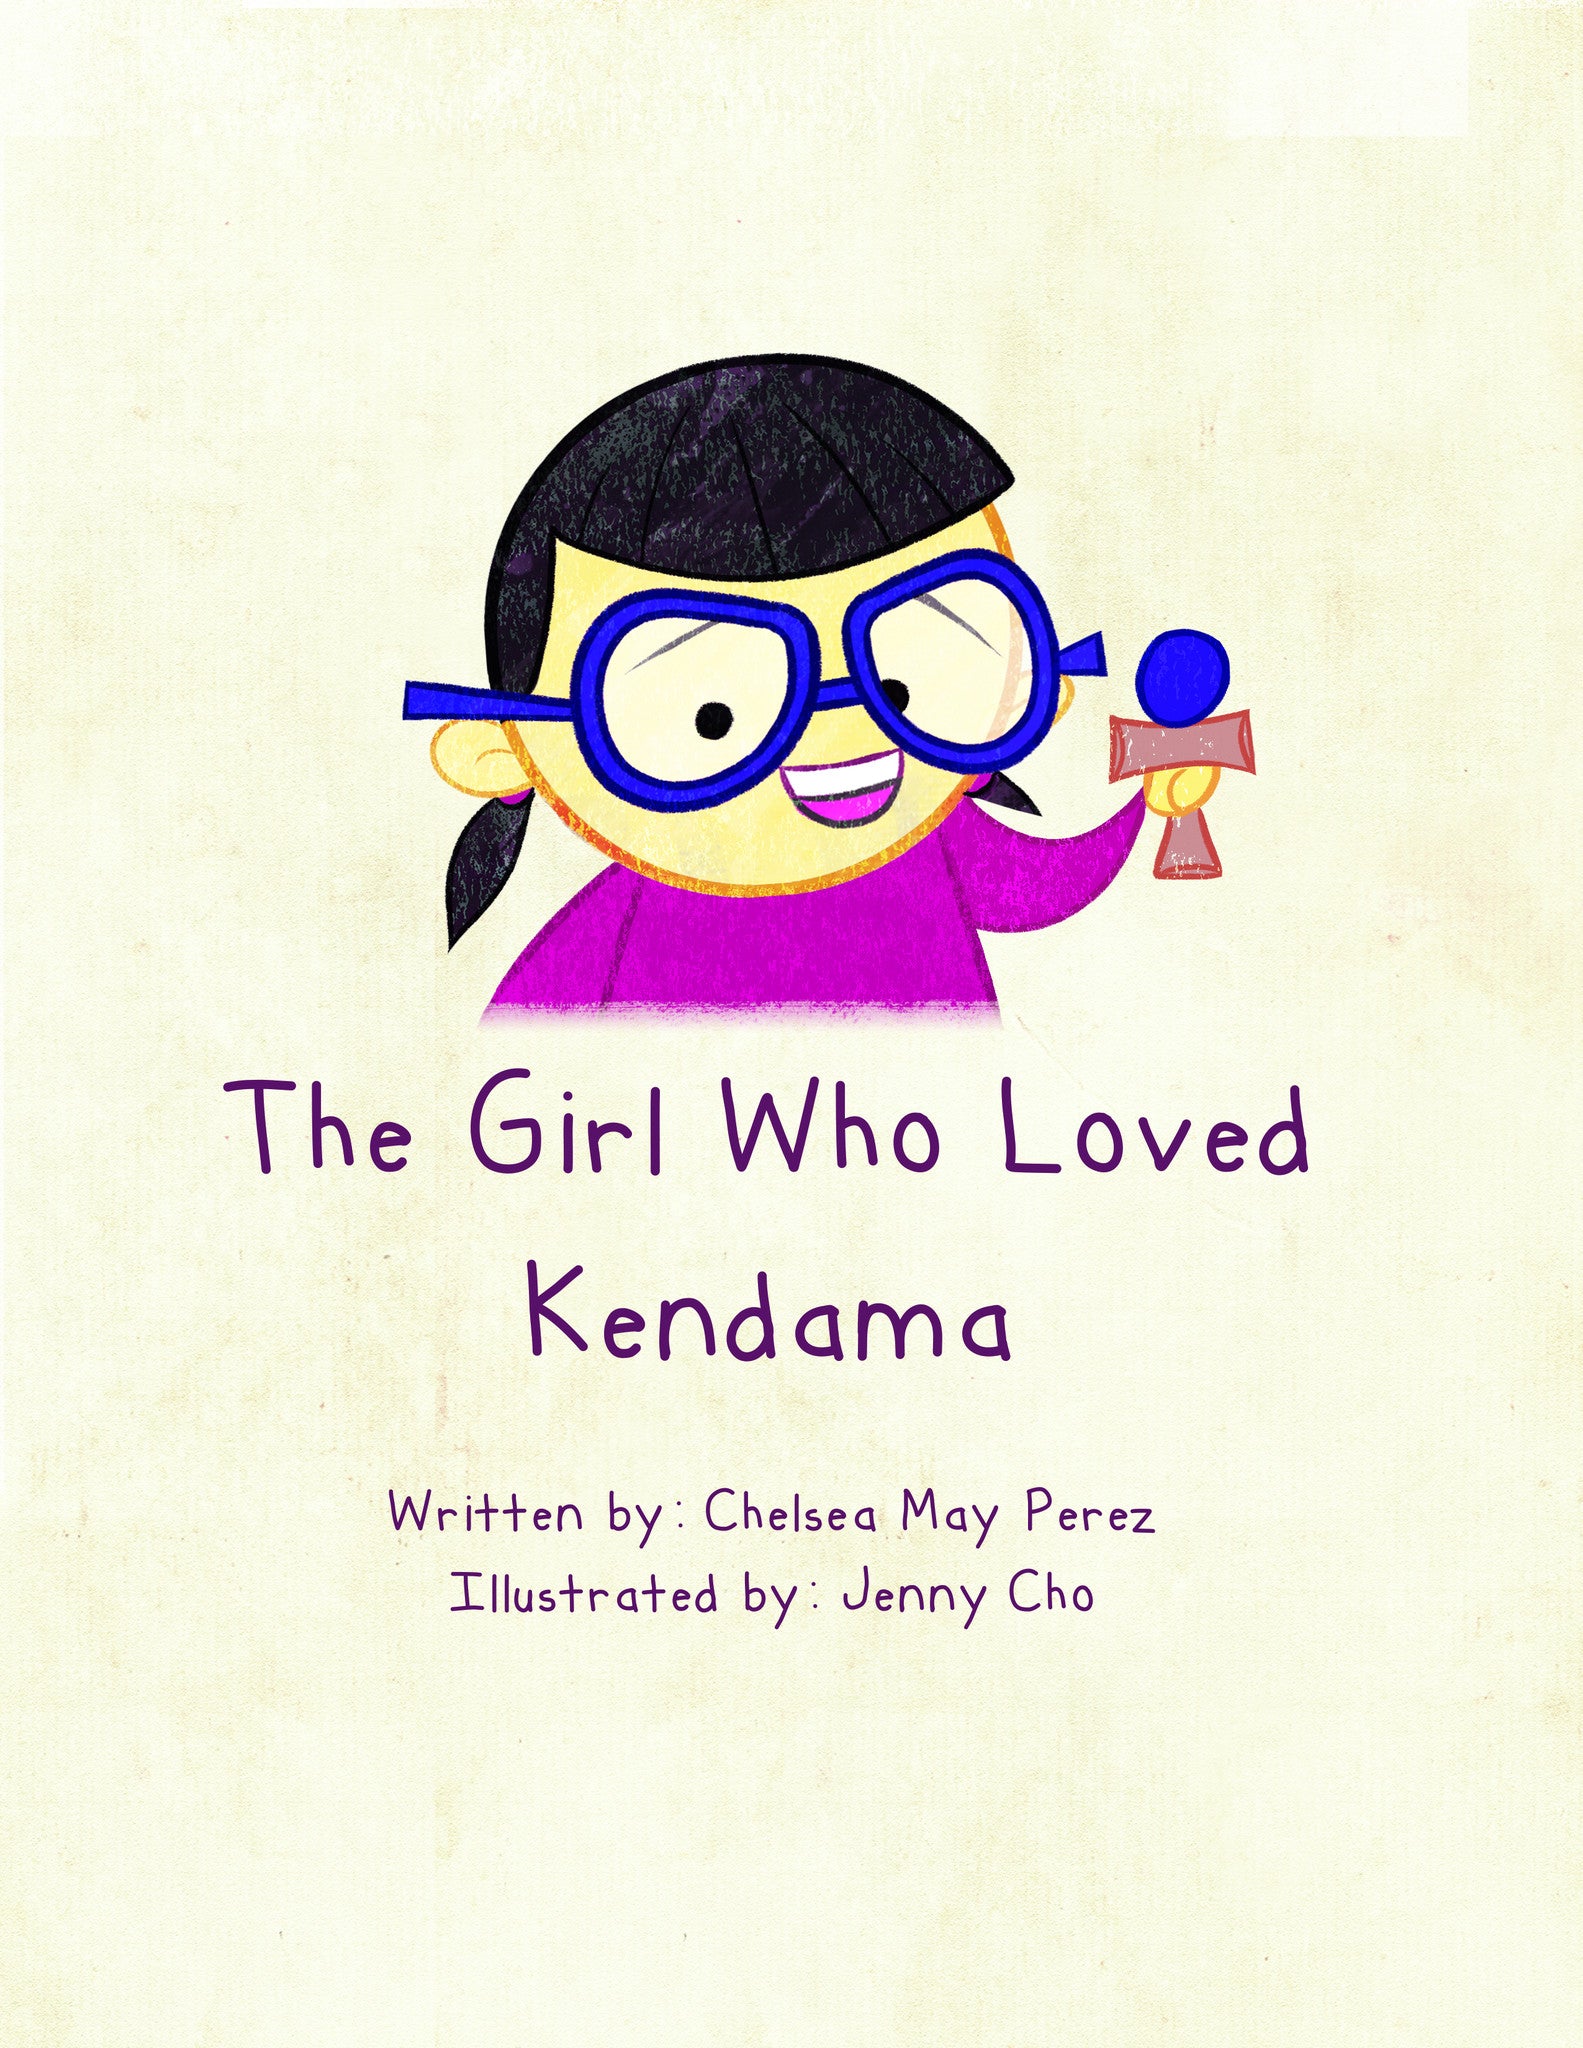 The Girl Who Loved Kendama